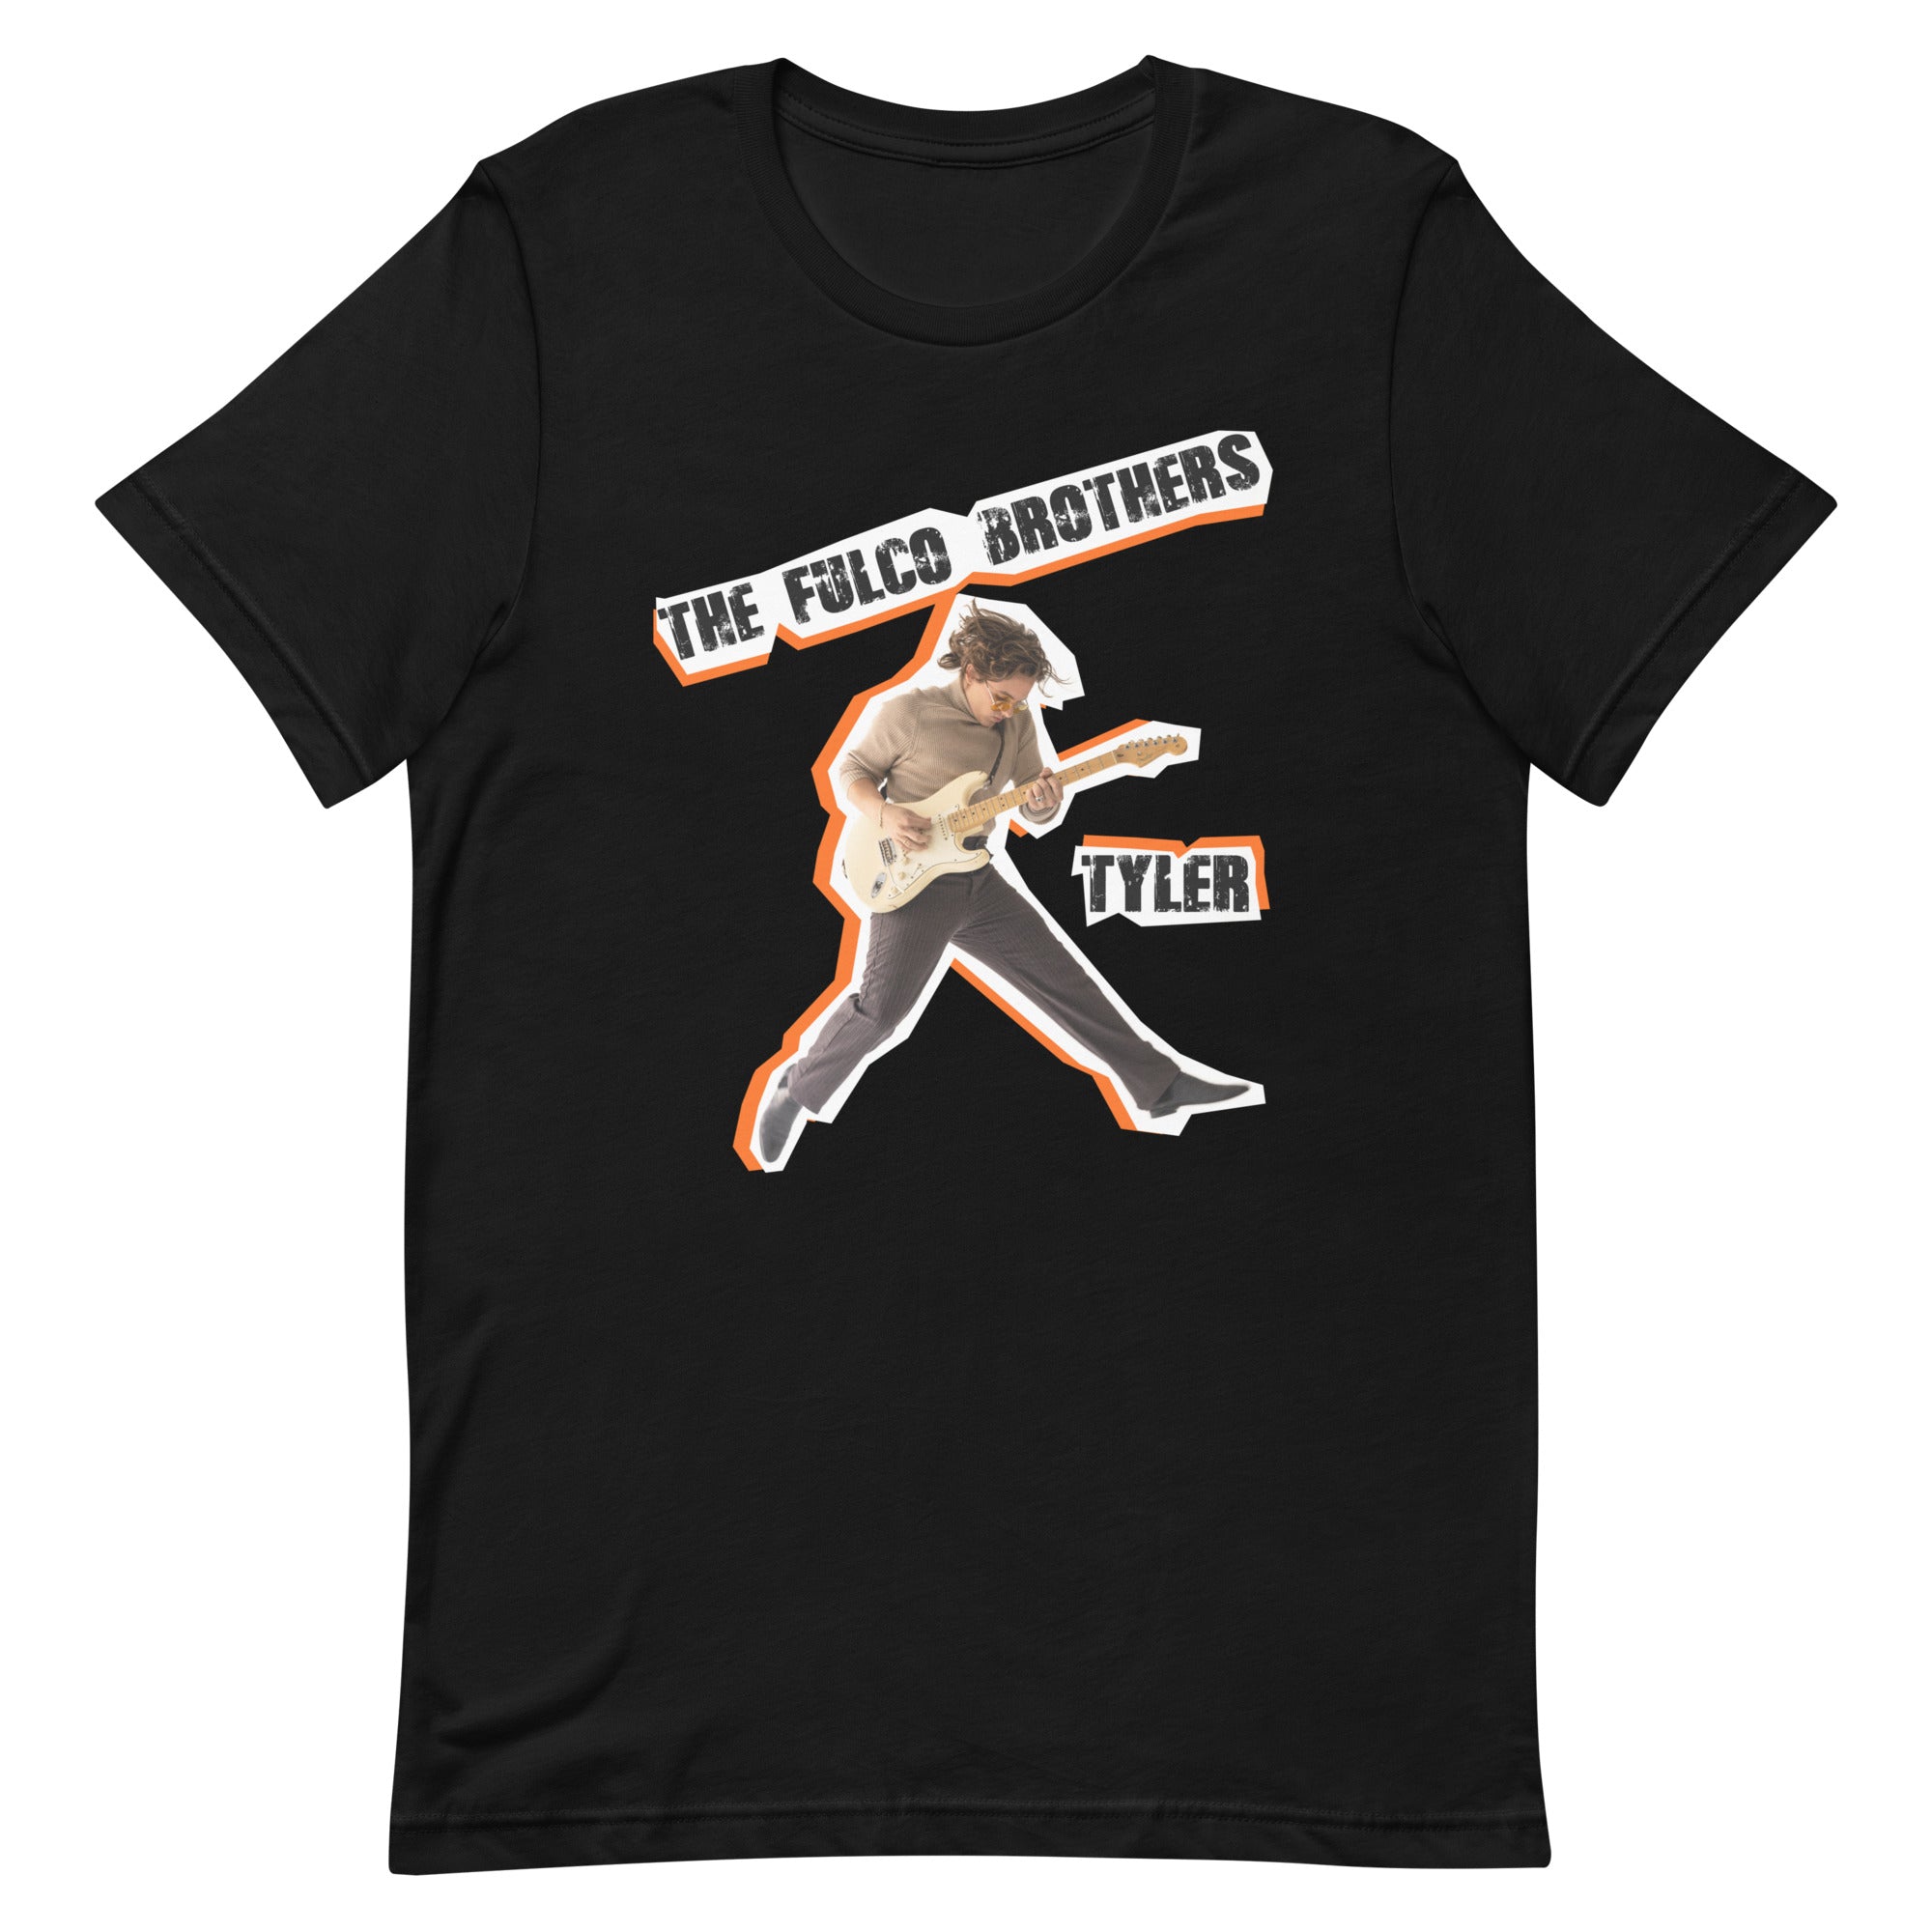 The Fulco Brothers - "Tyler" - t-shirt